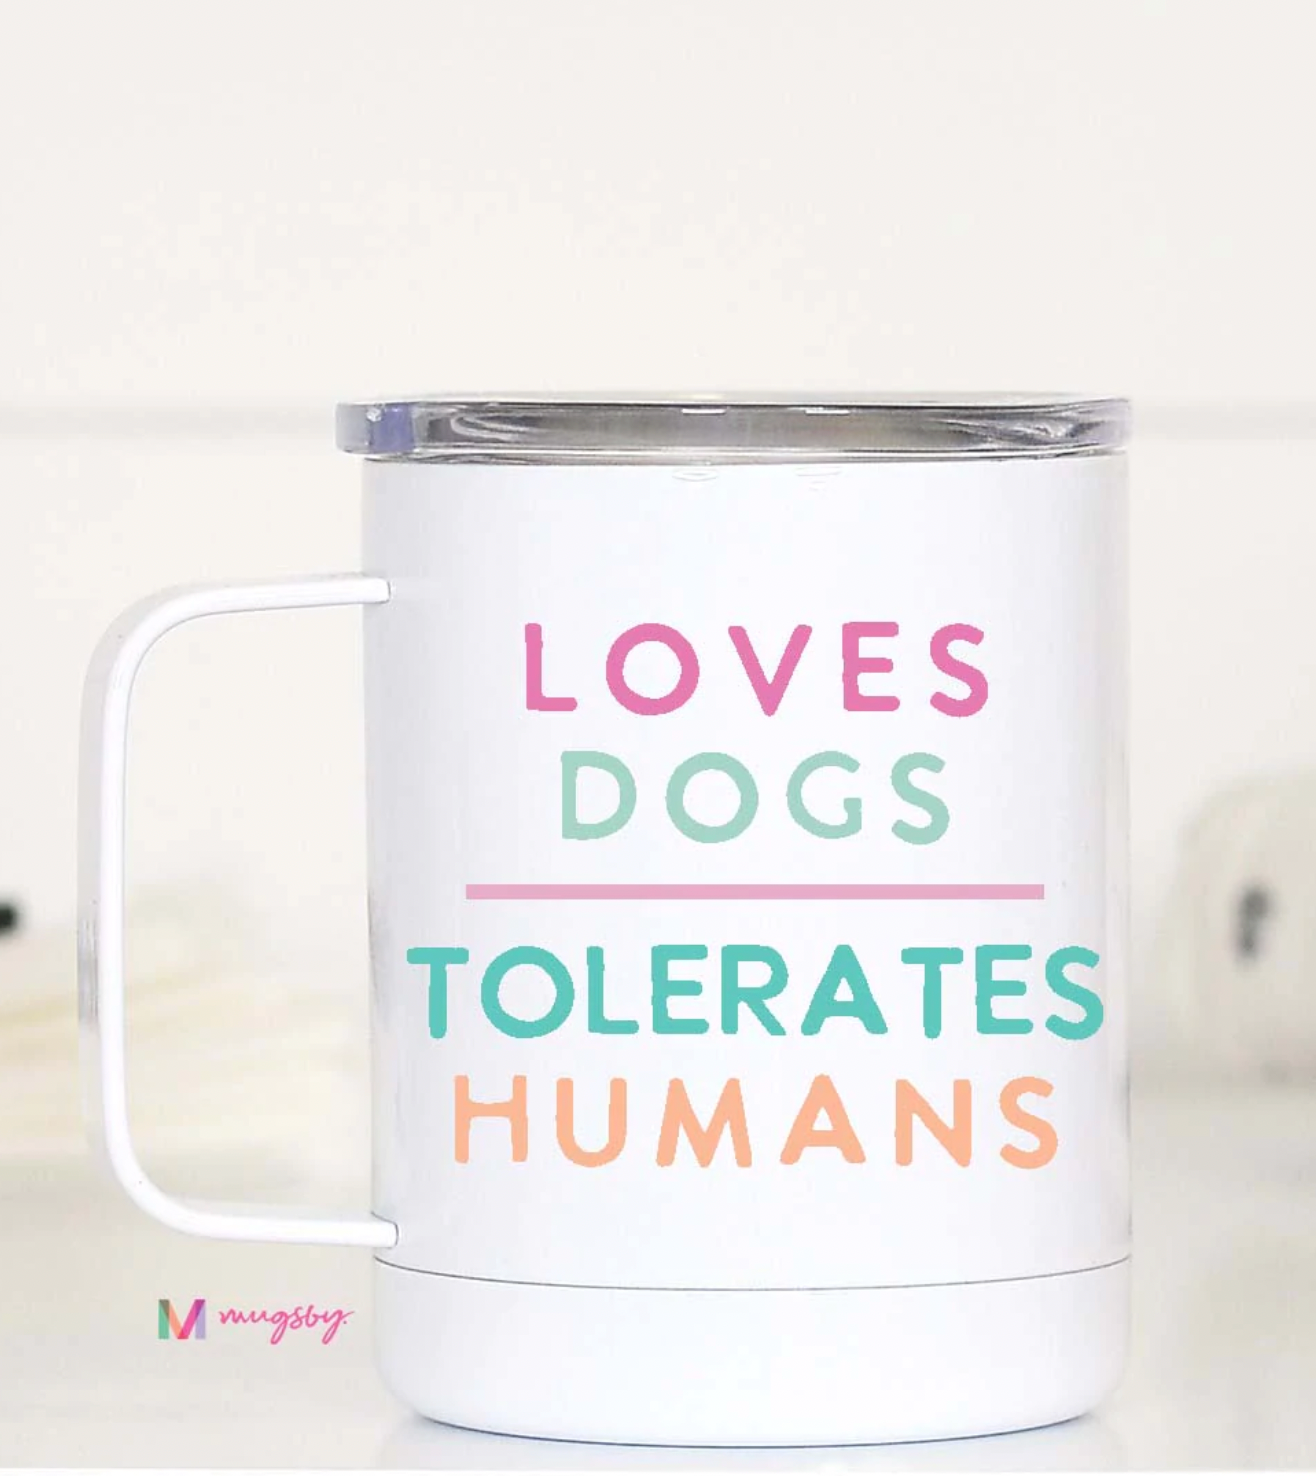 Loves Dogs, Tolerates Humans Travel Mug Cup with Lid